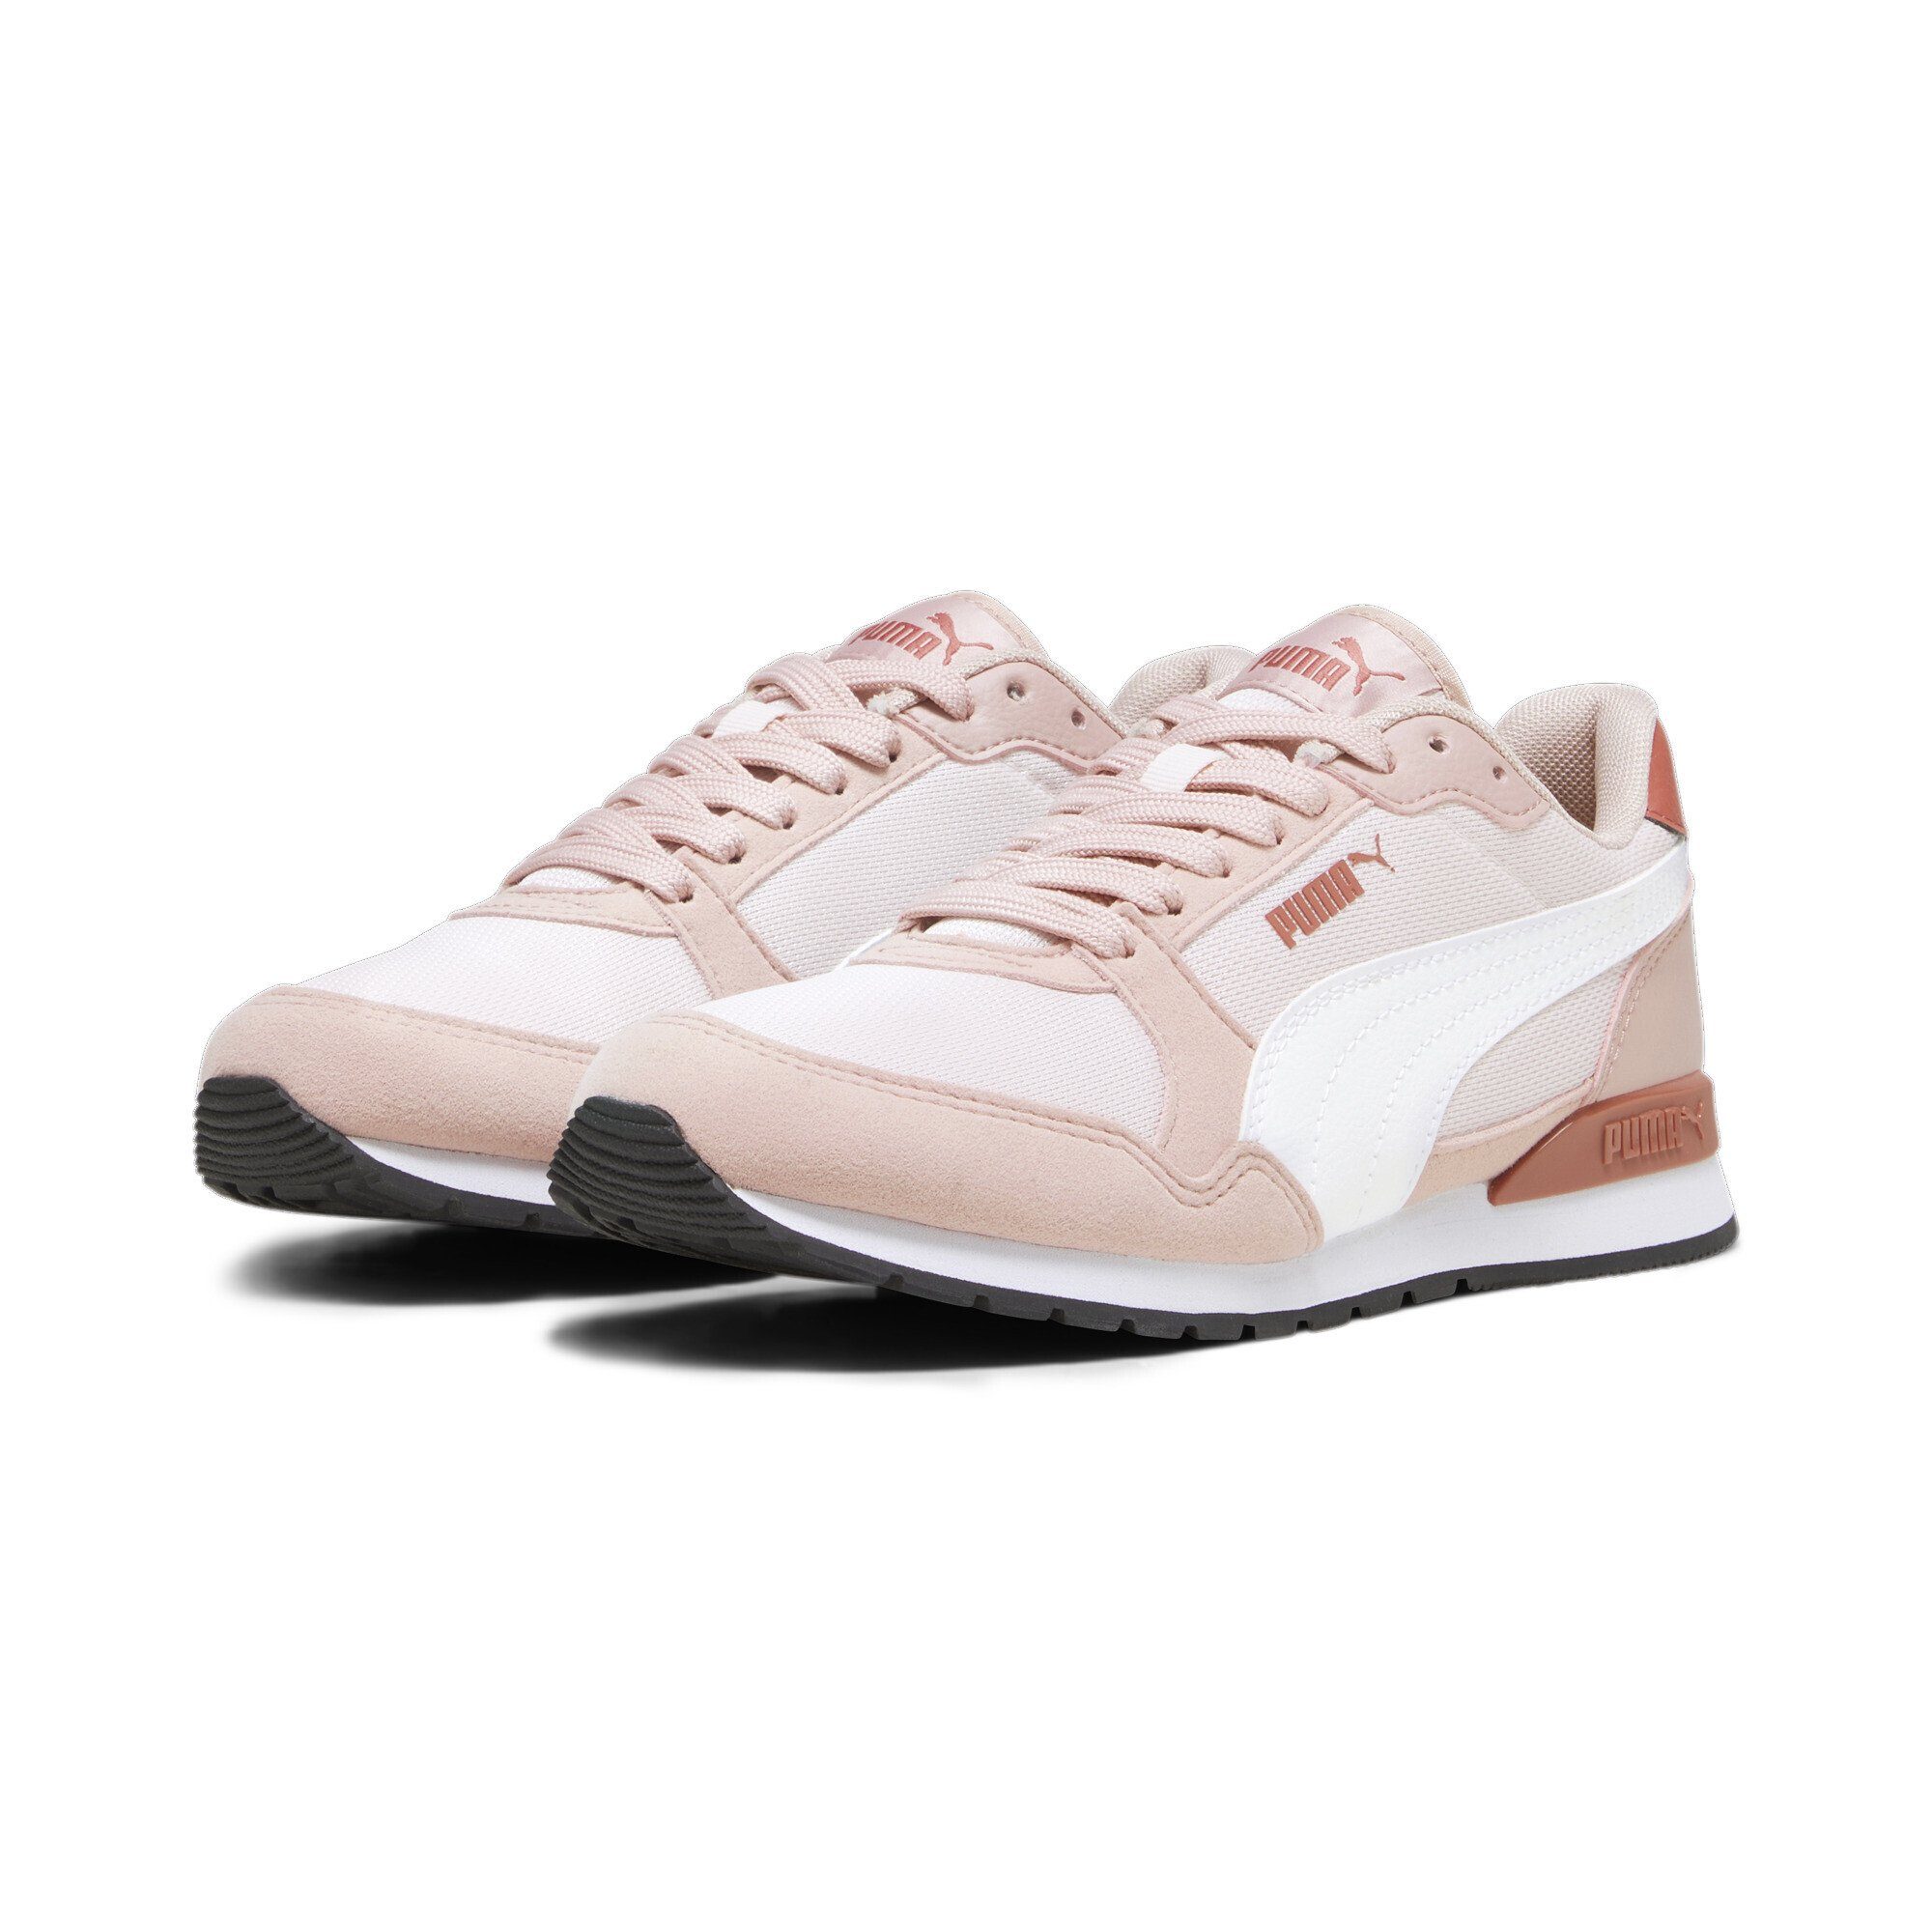 PUMA ST Runner v3 Mesh V Sneakers Jugendliche Sneaker Frosty Pink White Astro Red | Sneaker low